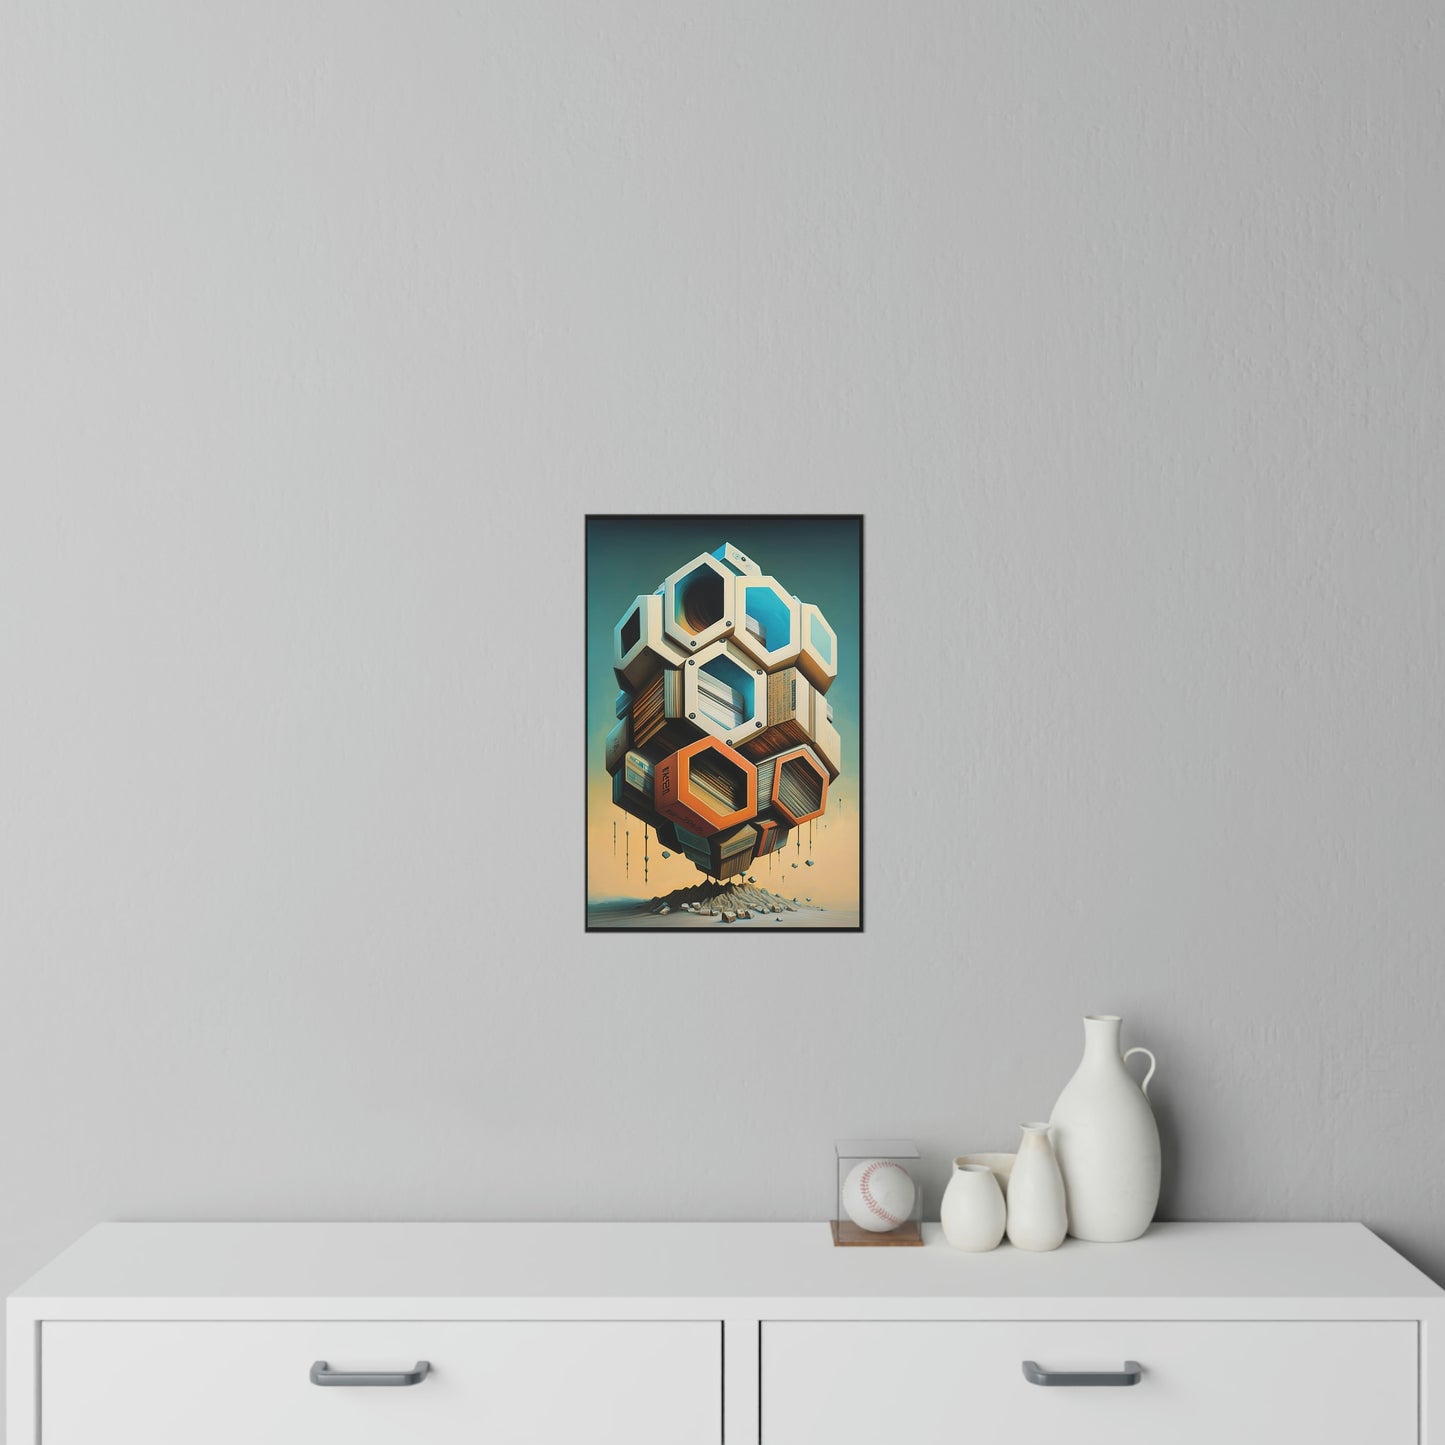 Hive Mind Wall Decal